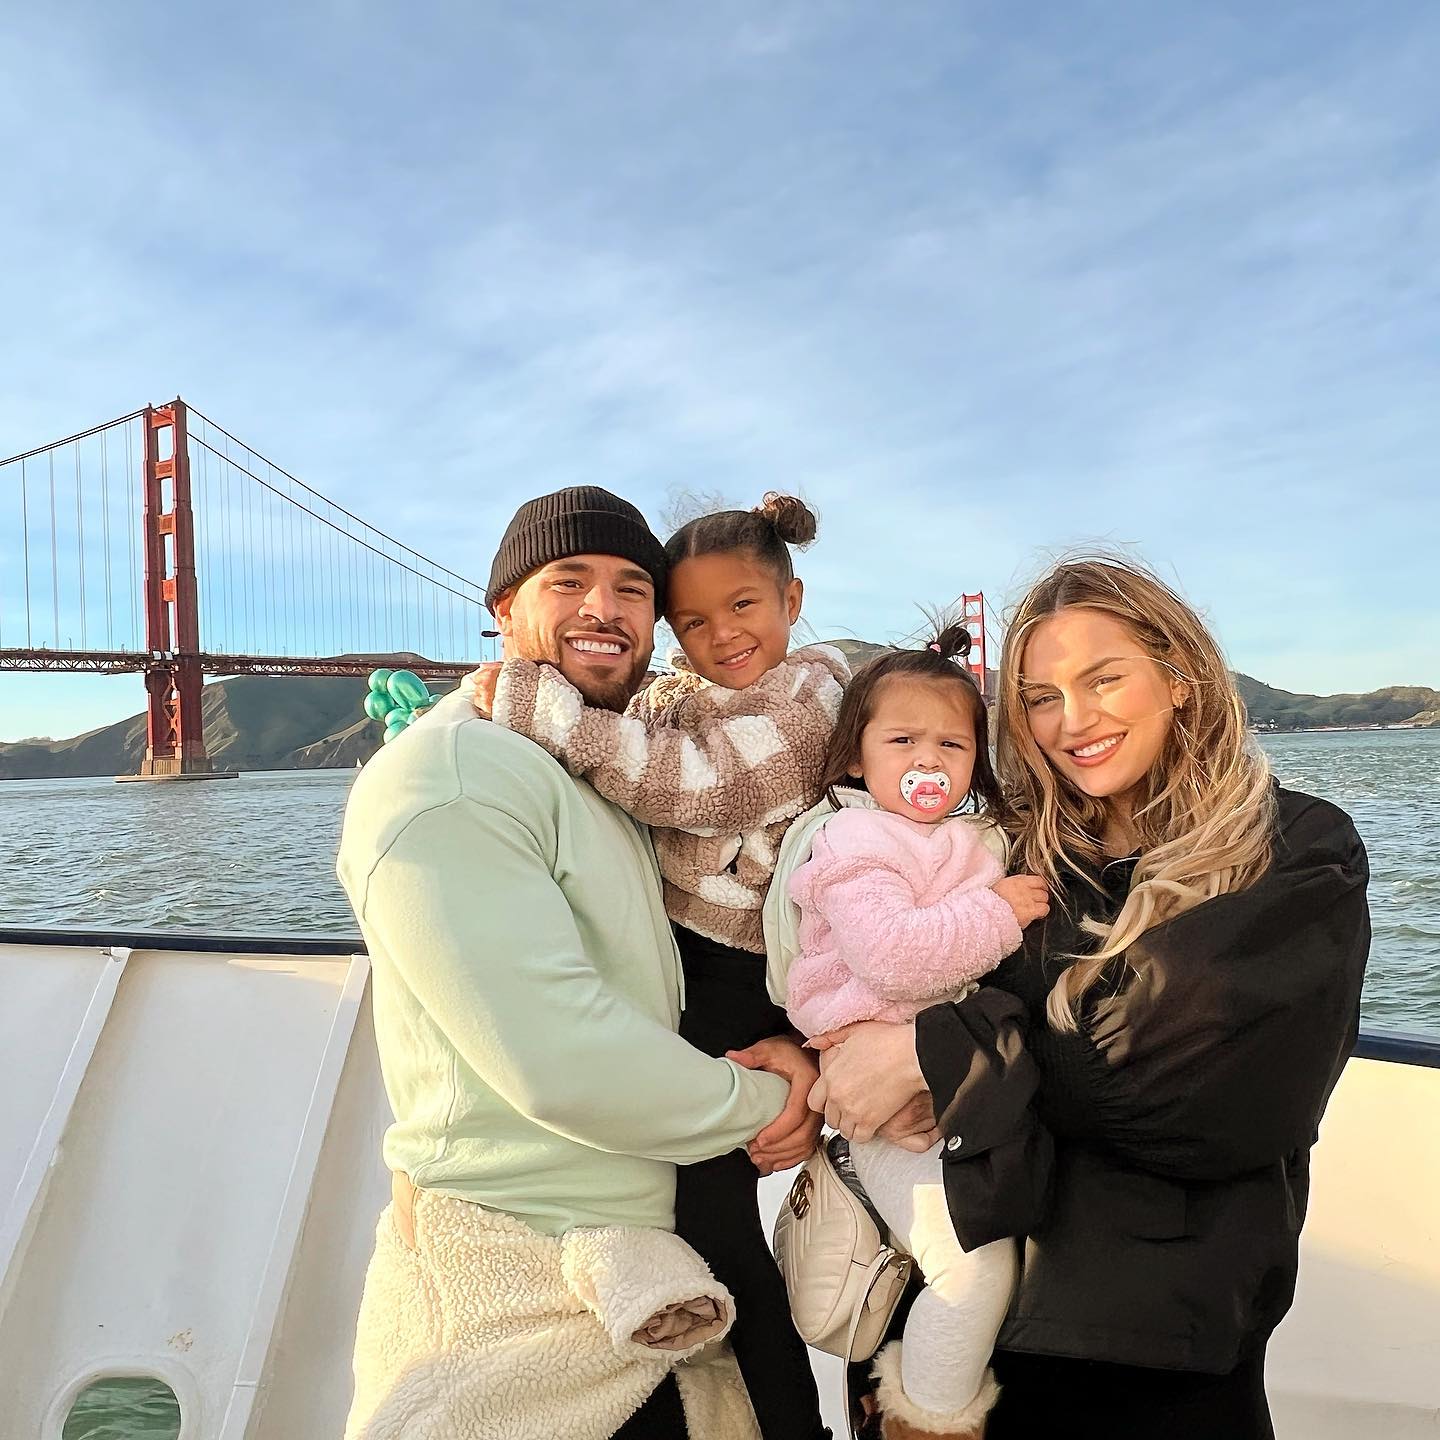 Challenge's Cory Wharton, More Celeb Parents' Epic 2022 Vacations With Kids